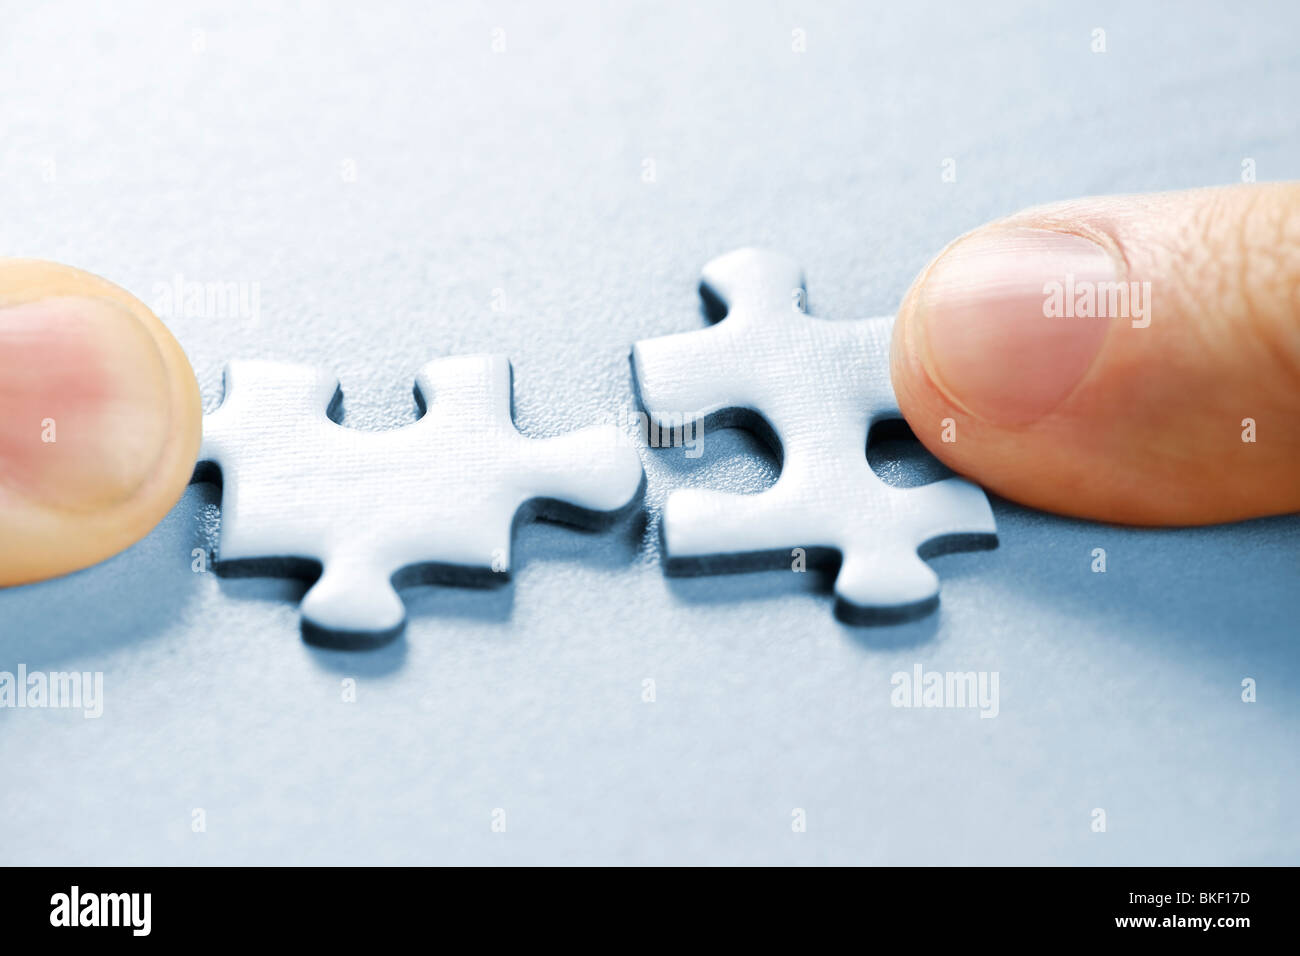 Fingers pushing two matching puzzle pieces together Stock Photo